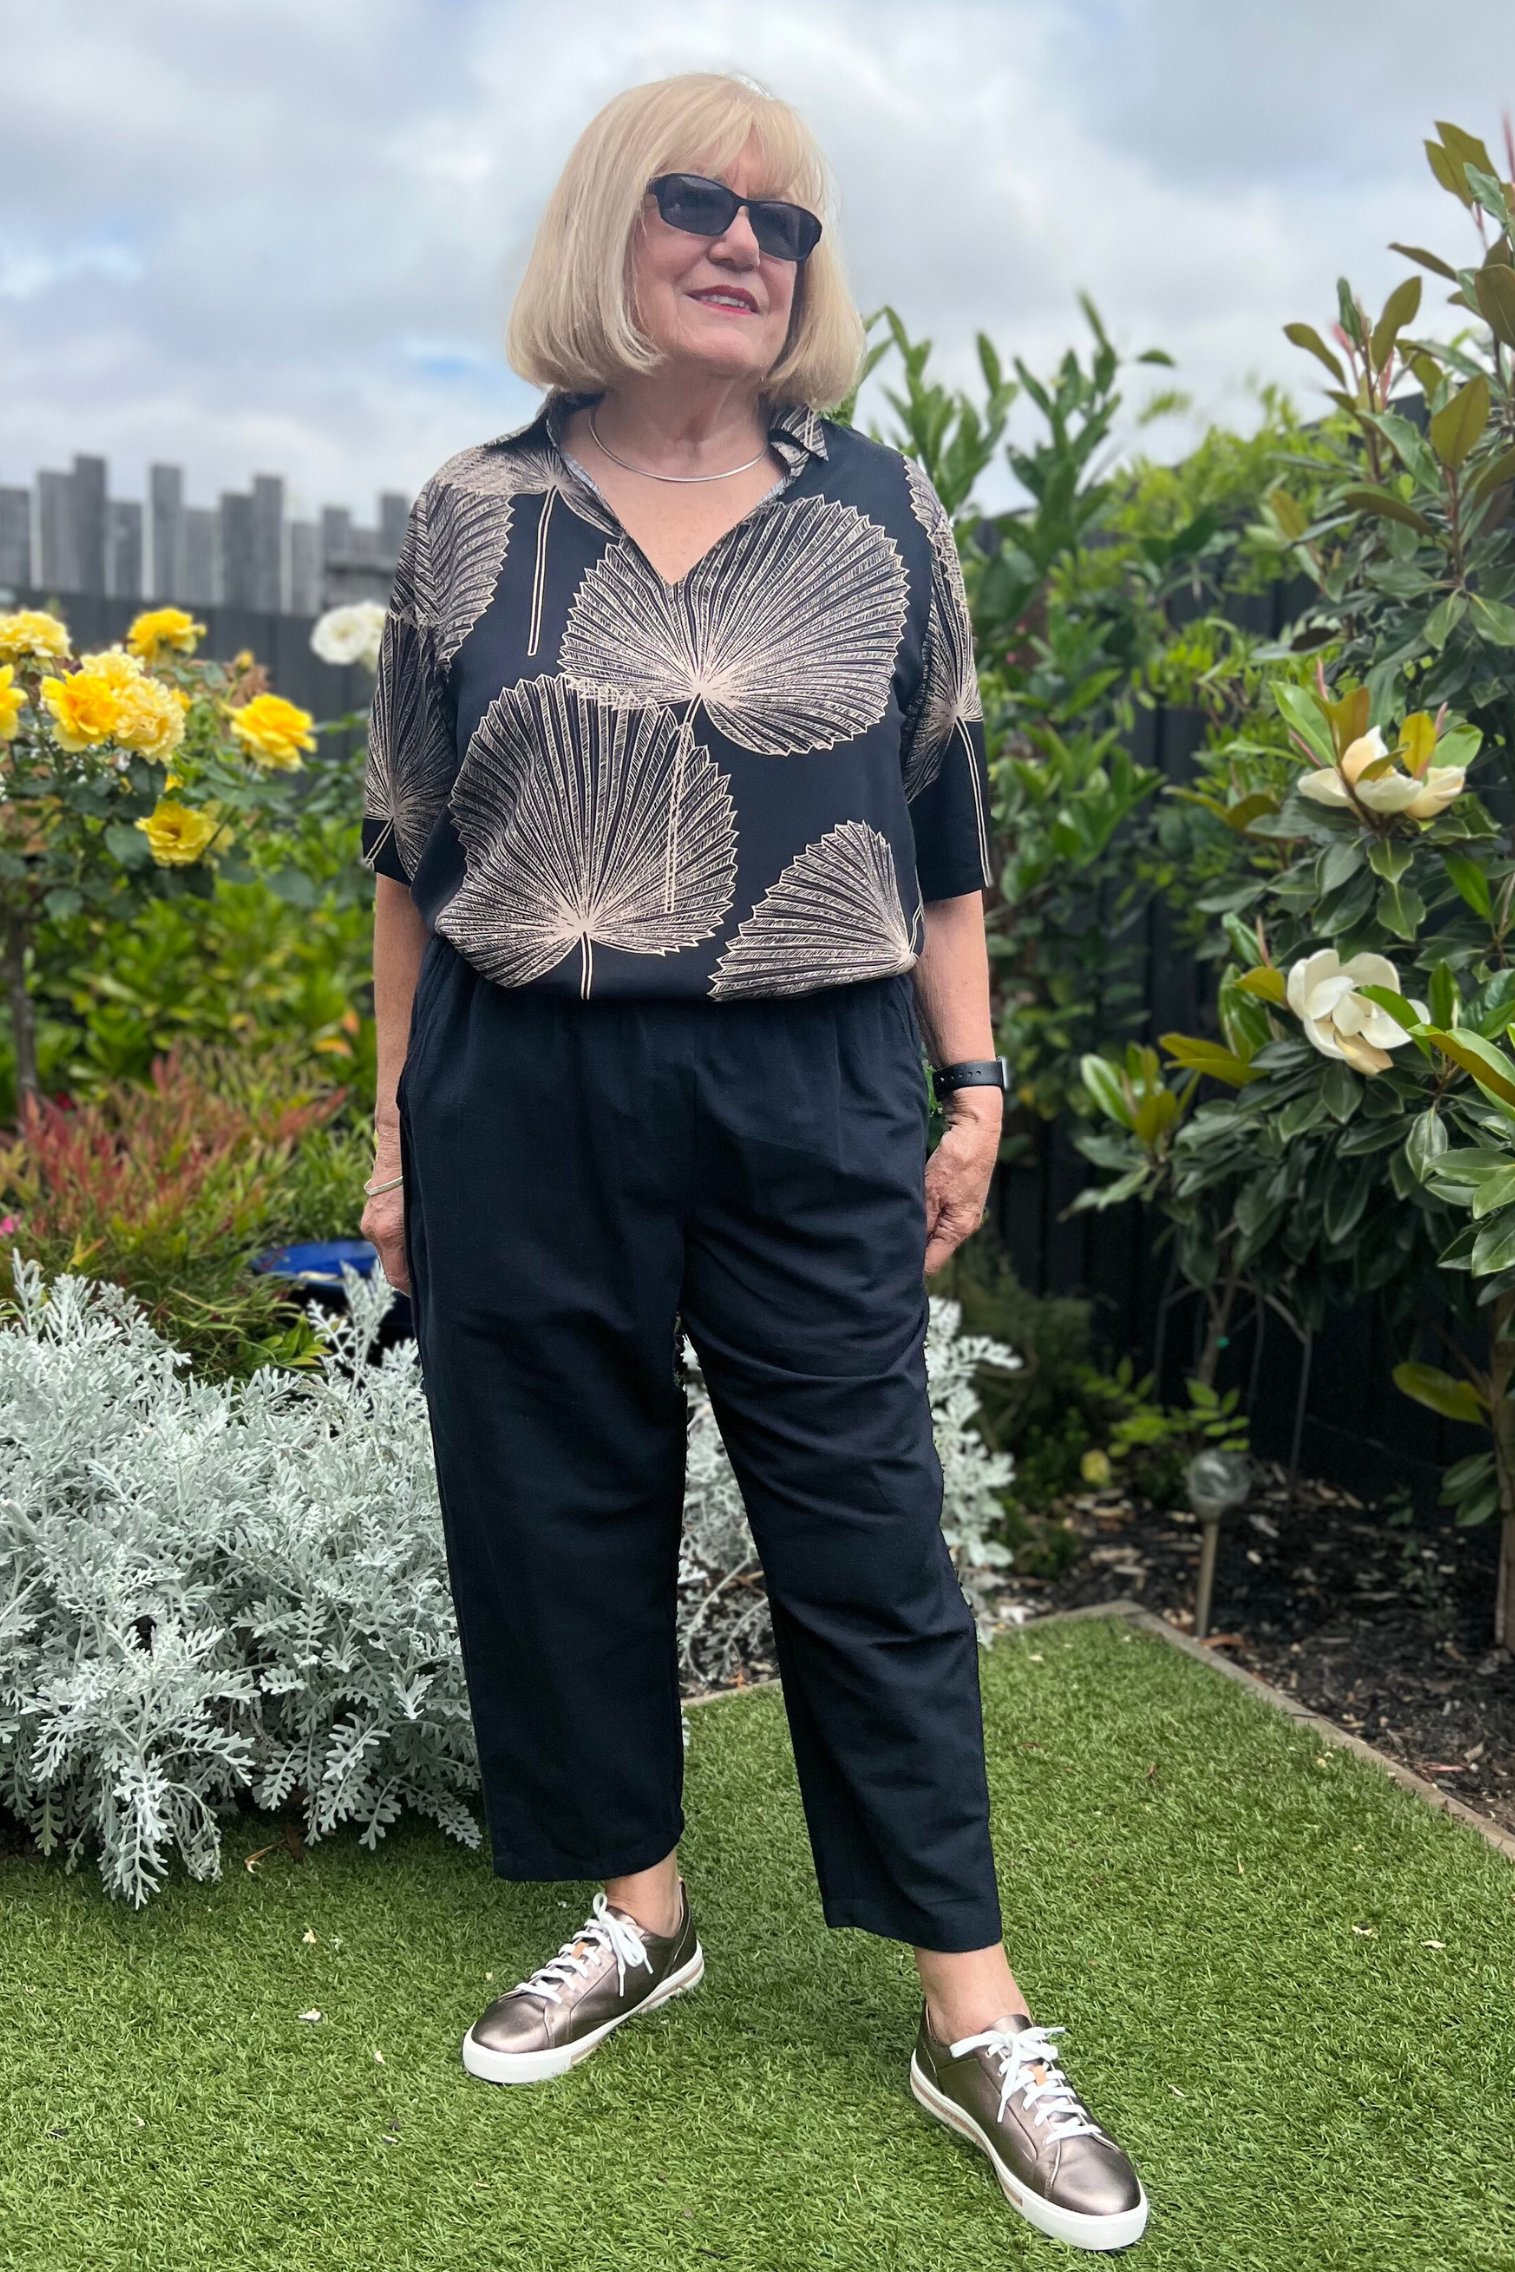 Kita Ku modelling the cotton black pant port with a top rebecca in Paolo print, and set in a sunny garden.